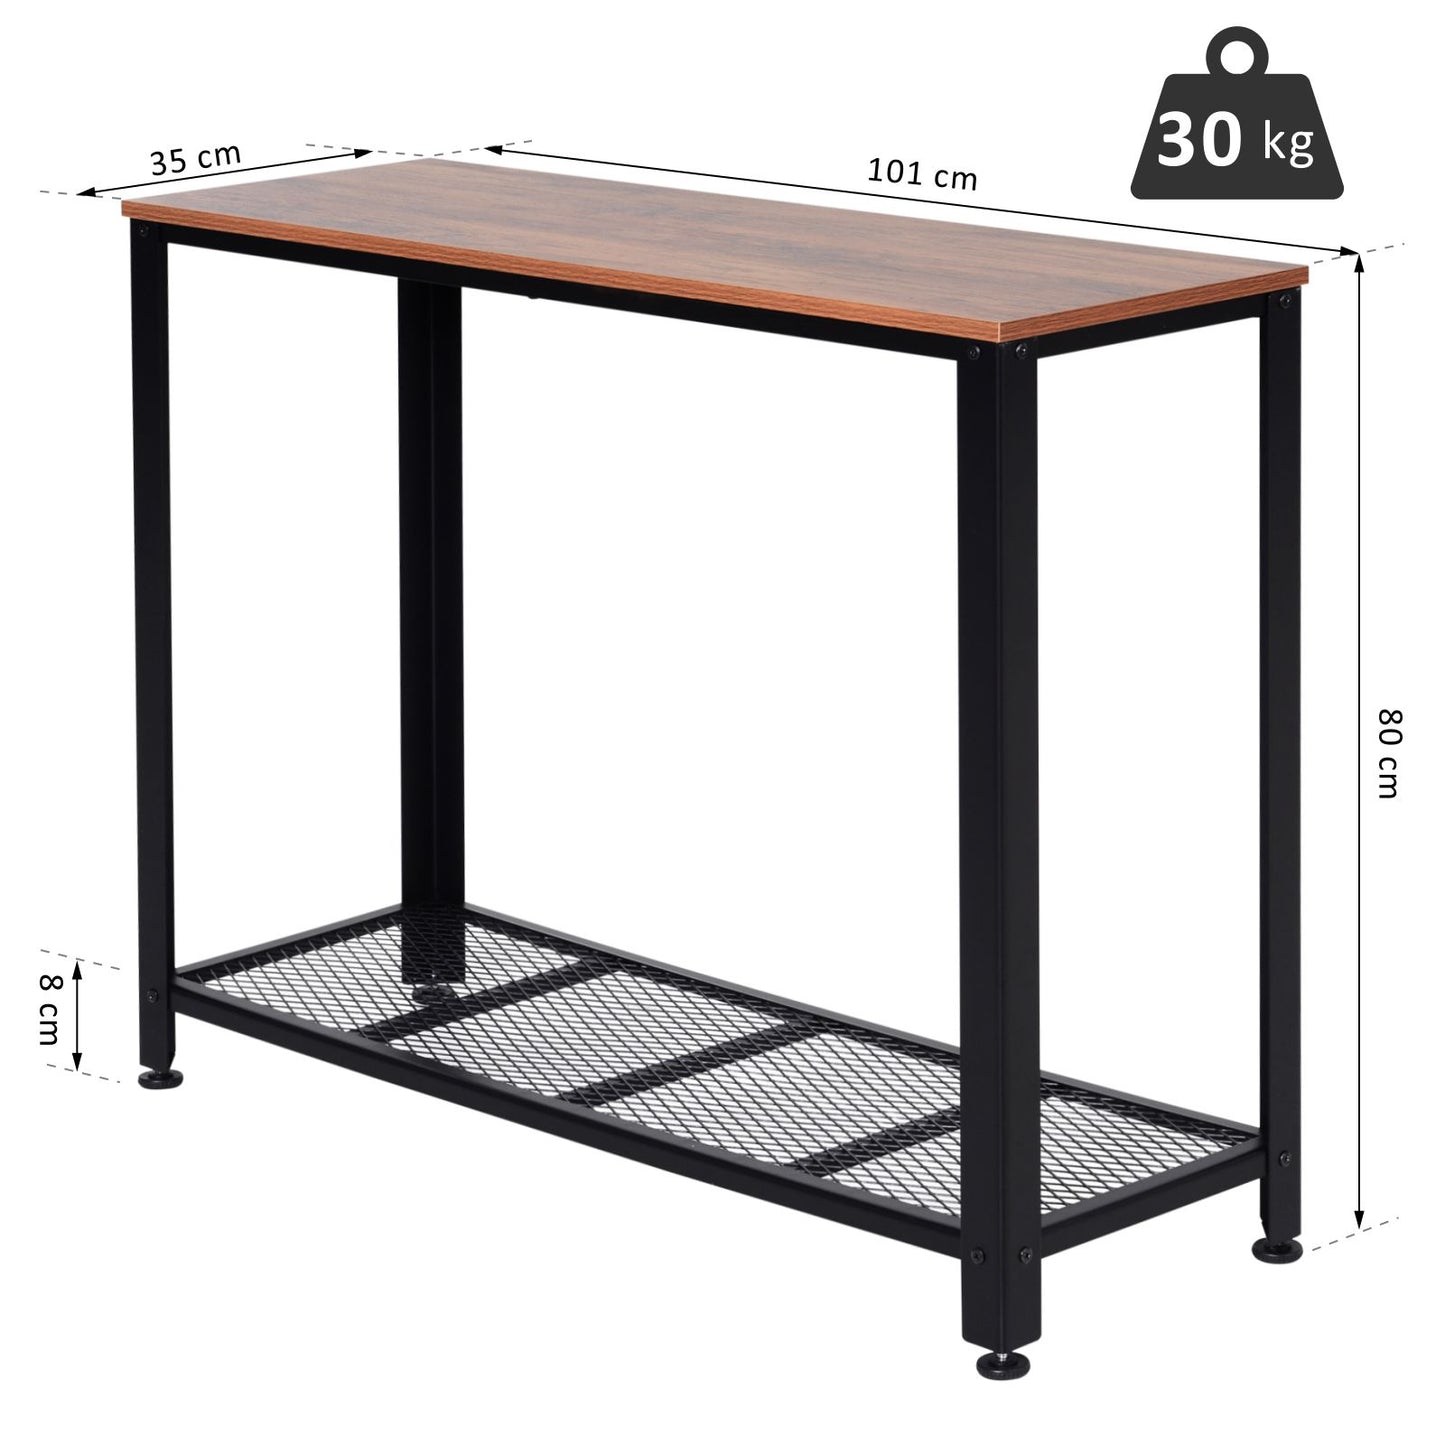 HOMCOM Steel Frame Industrial Style Console Table Brown/Black